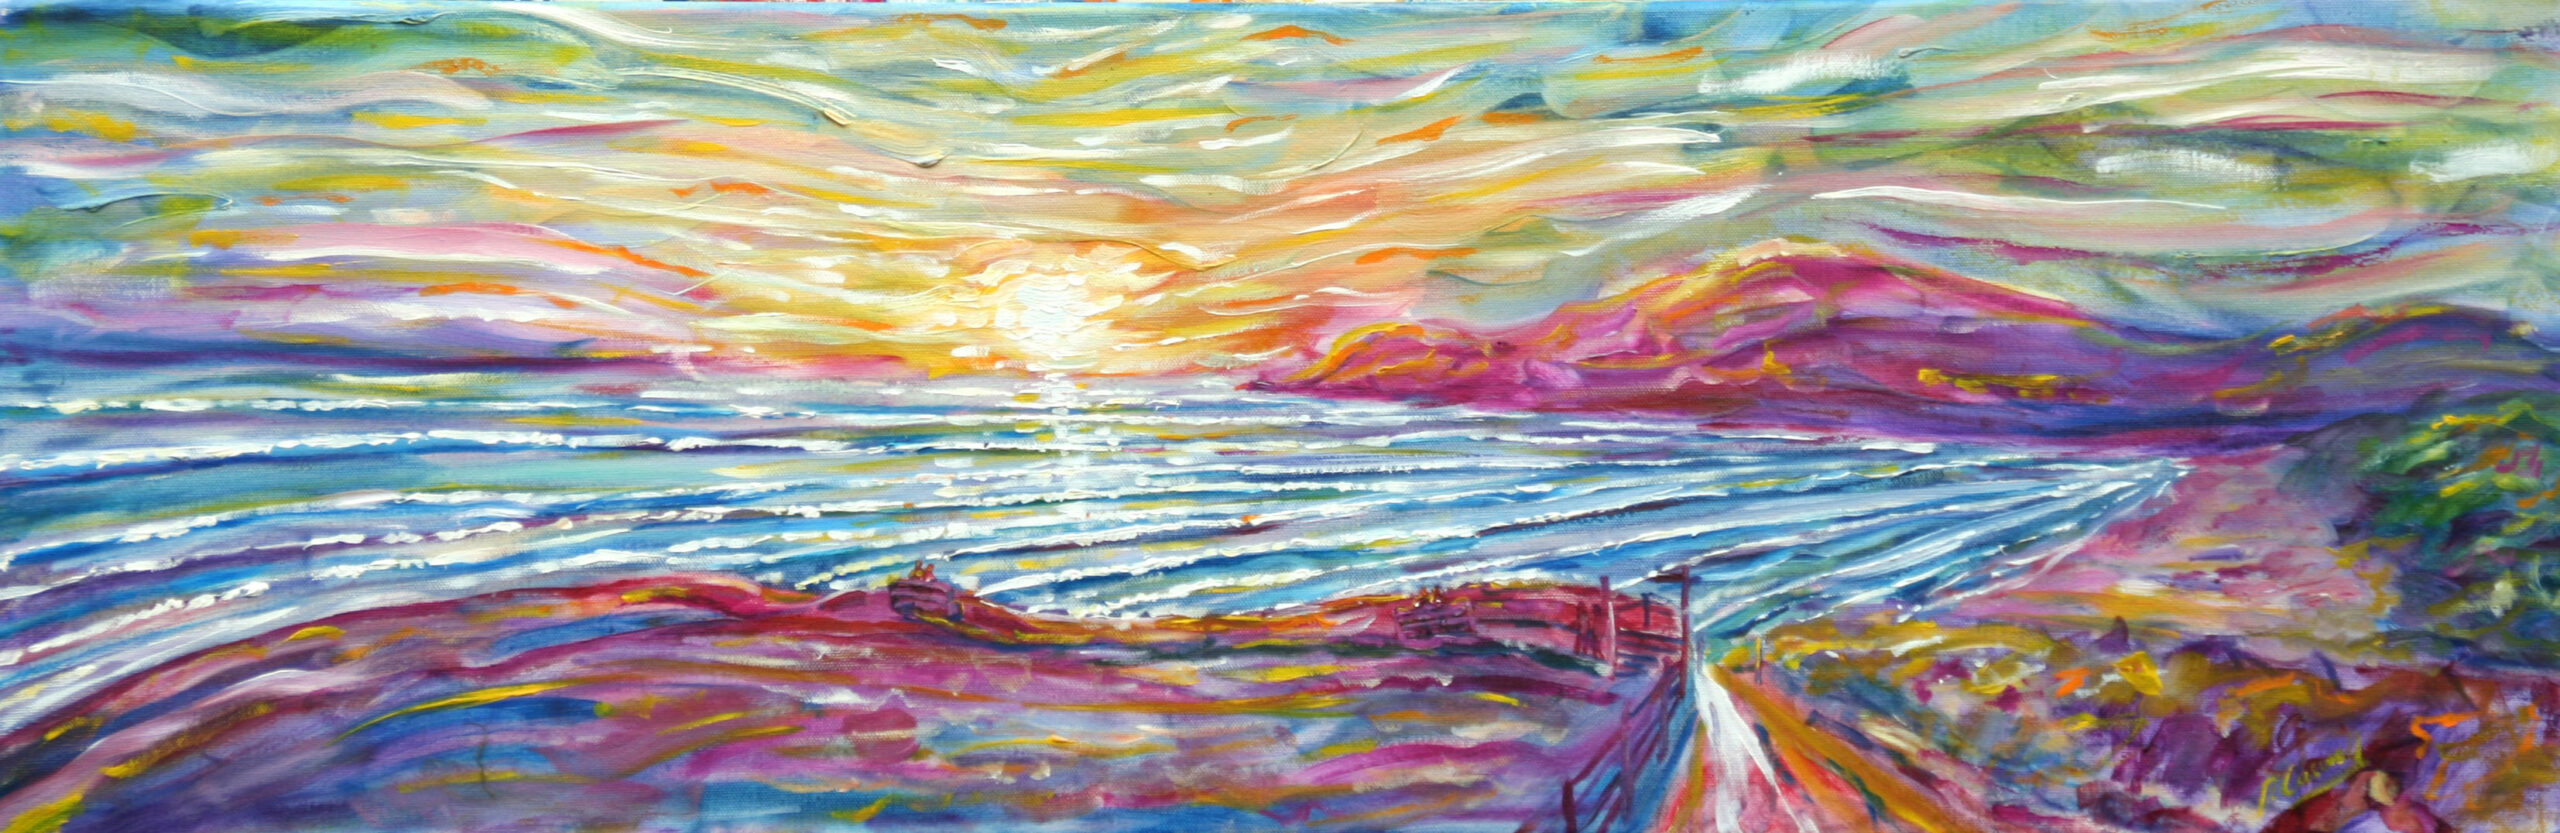 Croyde Beach Oil Painting at sunset